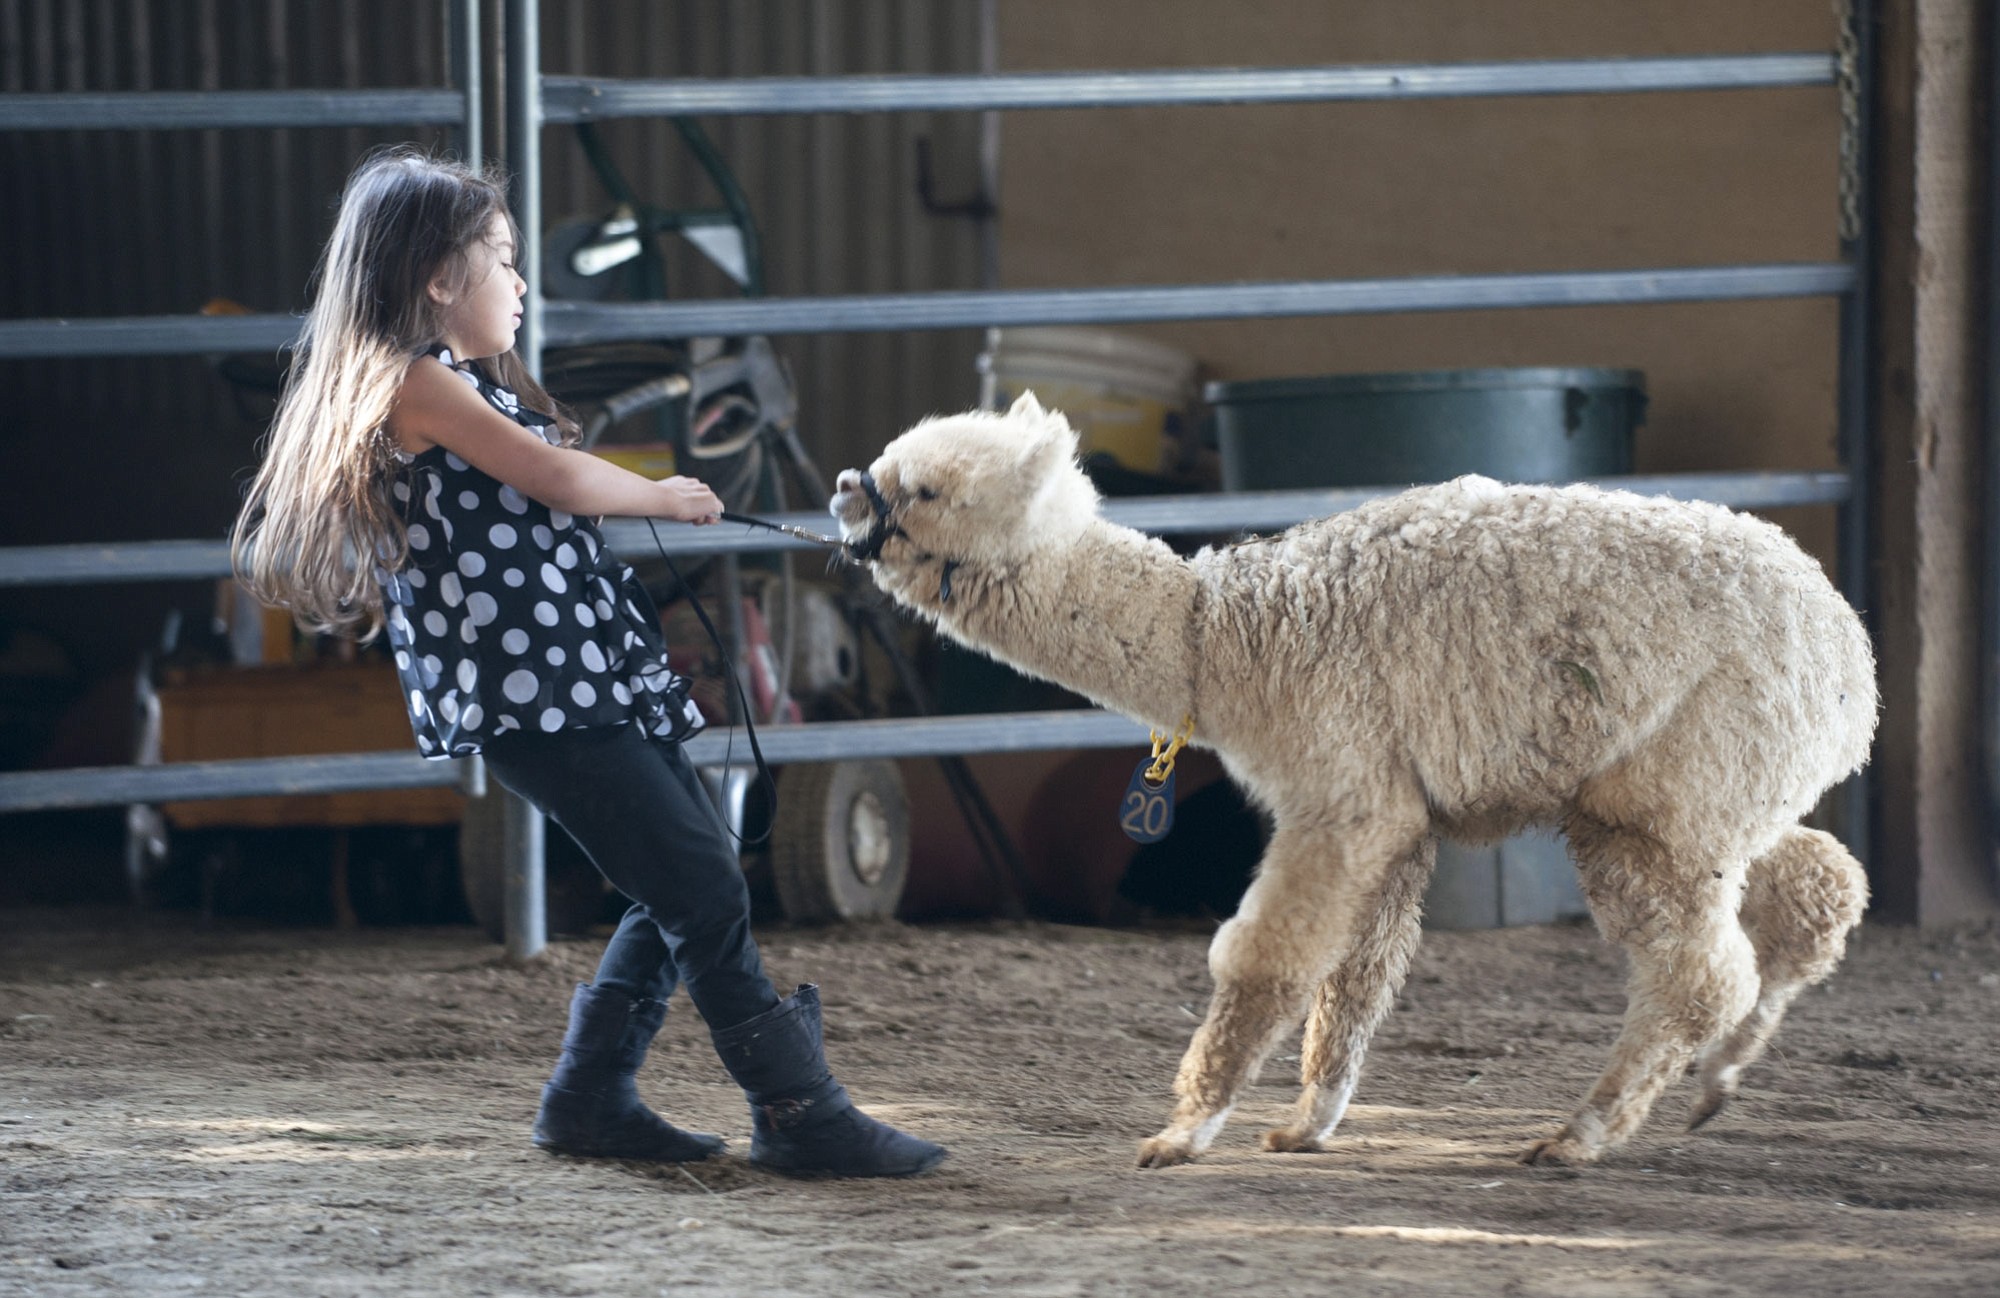 Nallaret Ramirez, 4,  takes a baby alpaca for a walk as part of its show training at The Aplaca Group in Ridgefield.